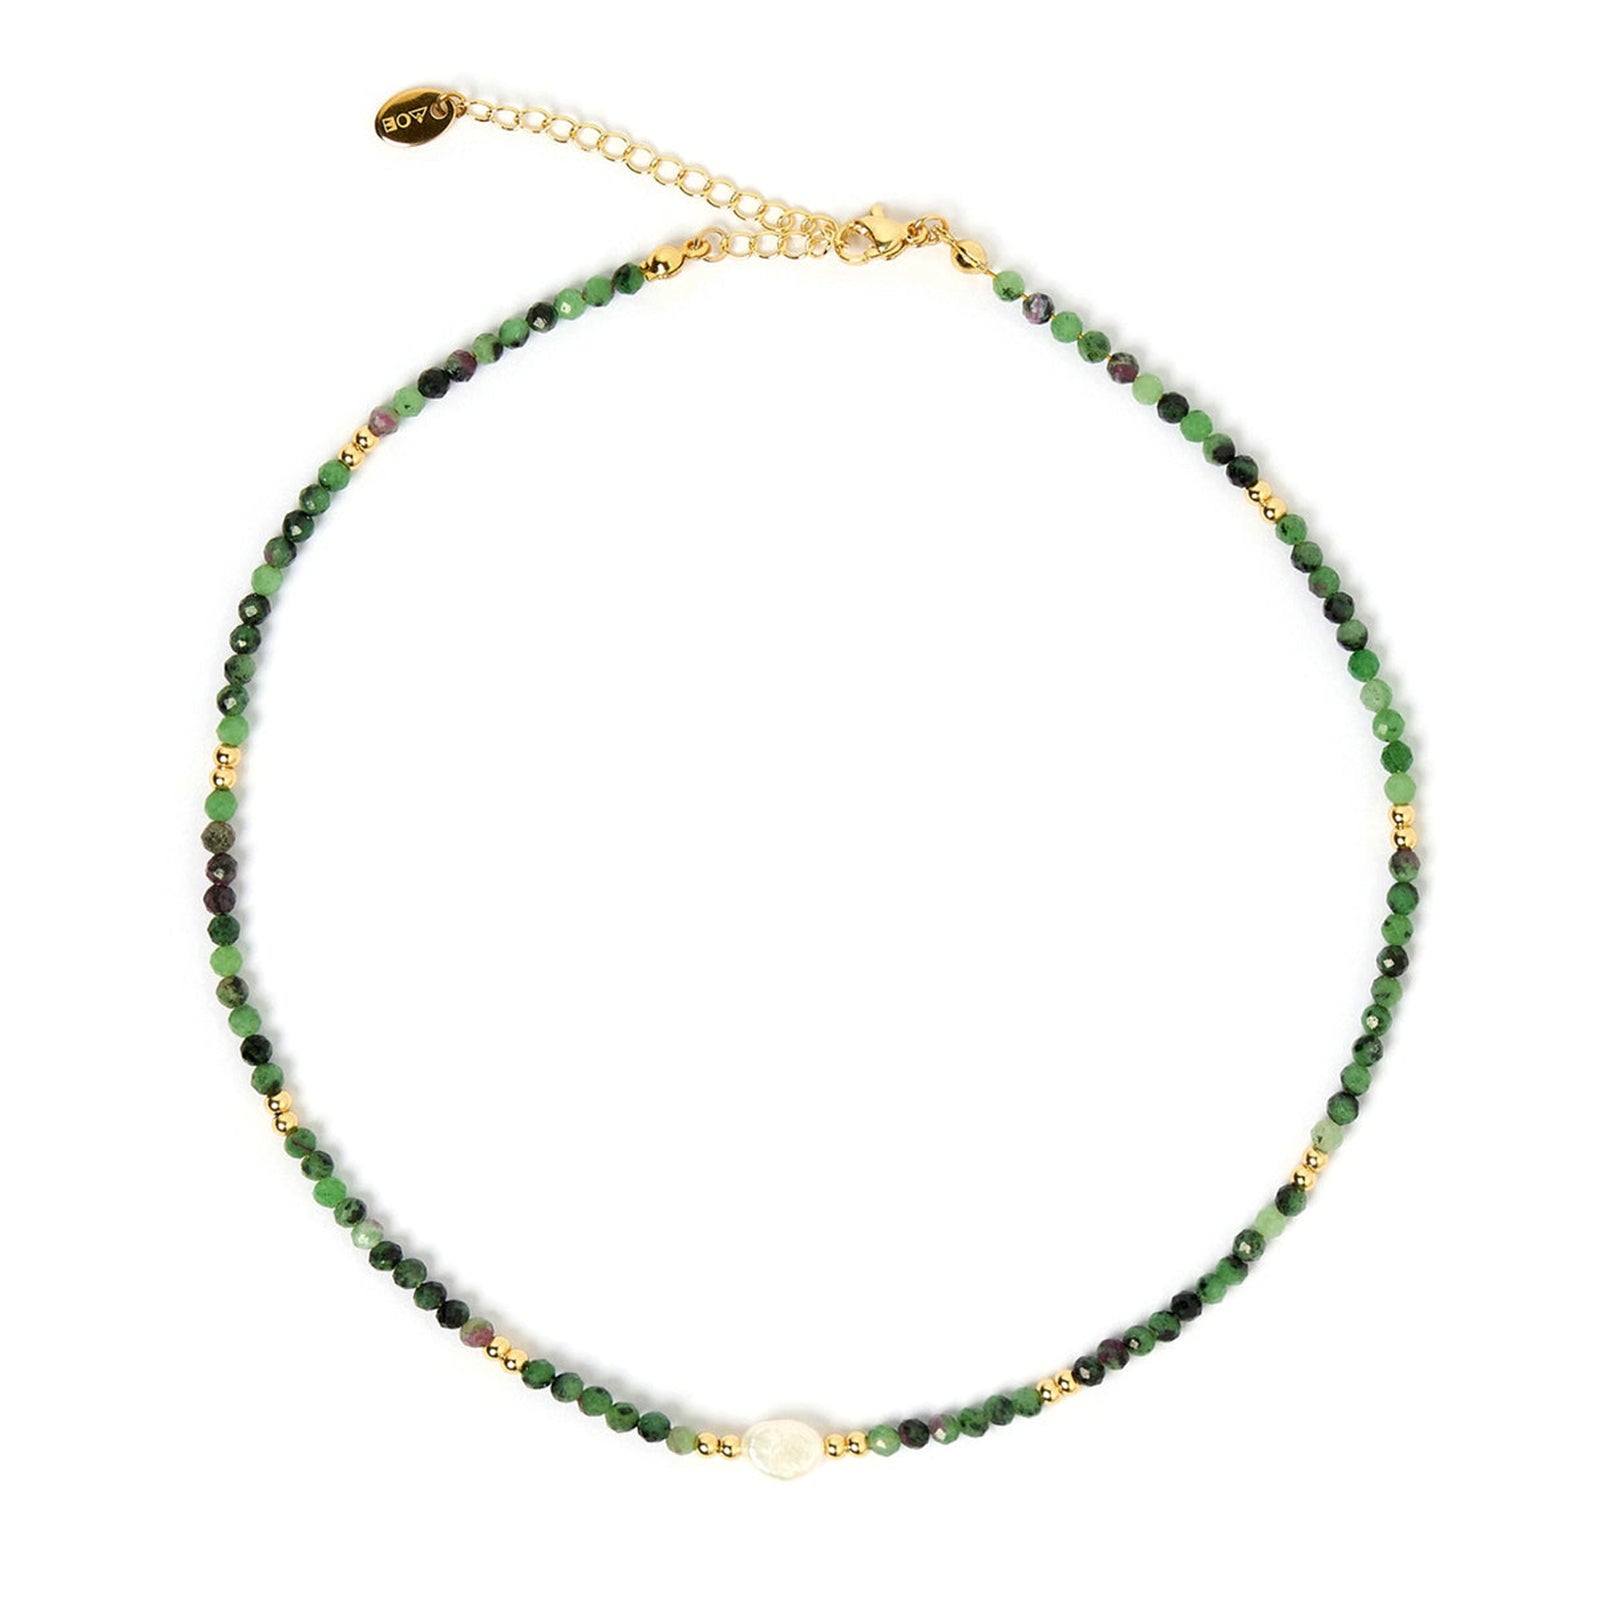 Handmade Arms Of Eve Mila gemstone necklace featuring green and dark green beads, a pearl, and a gold chain